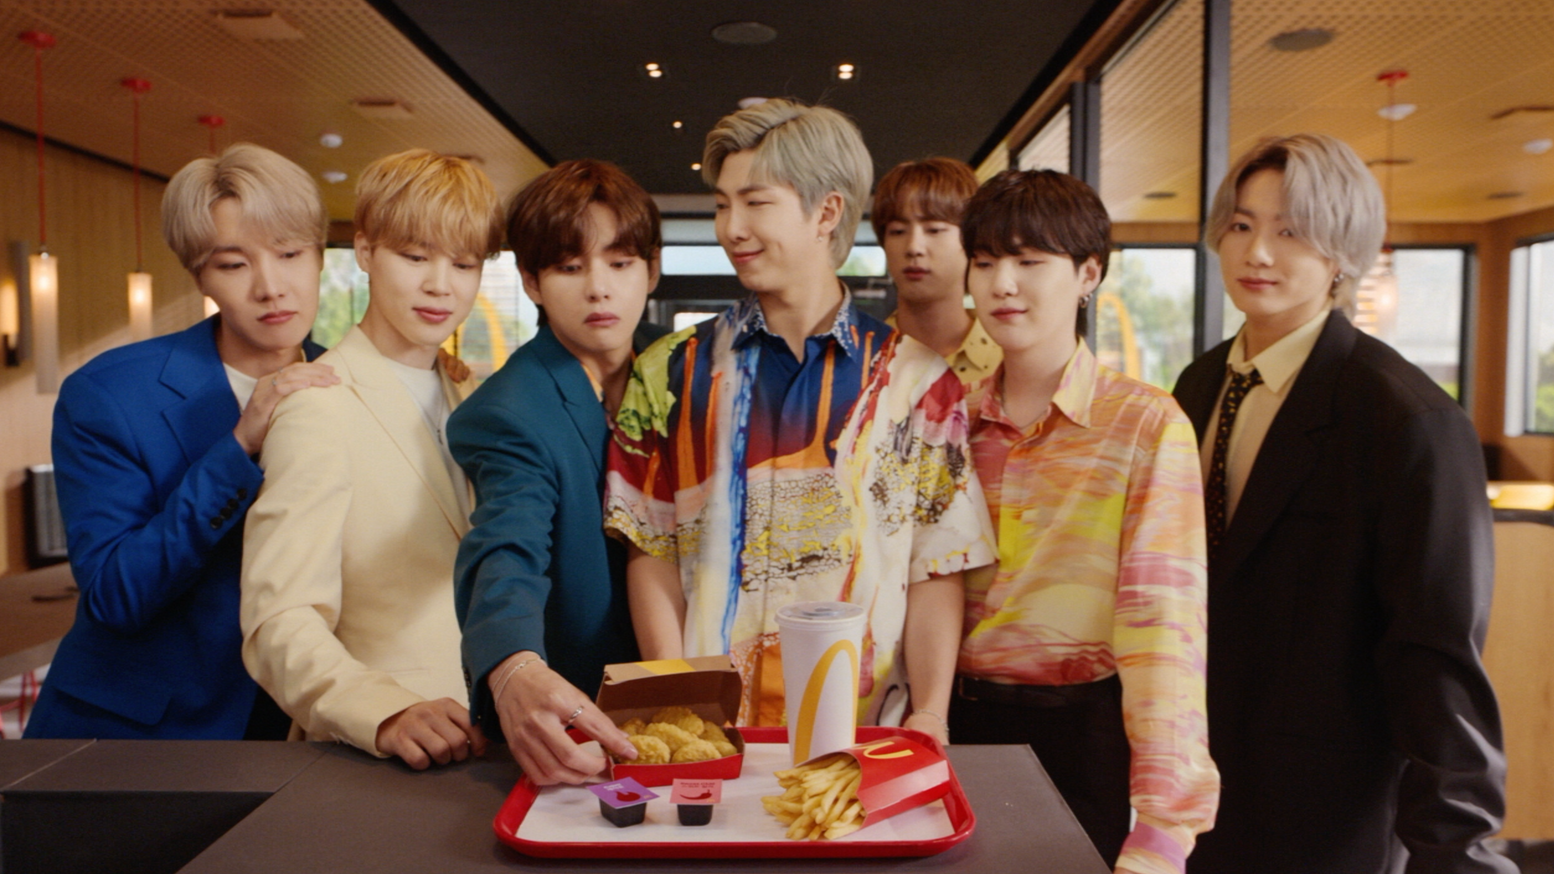 The BTS Meal - McDonald's